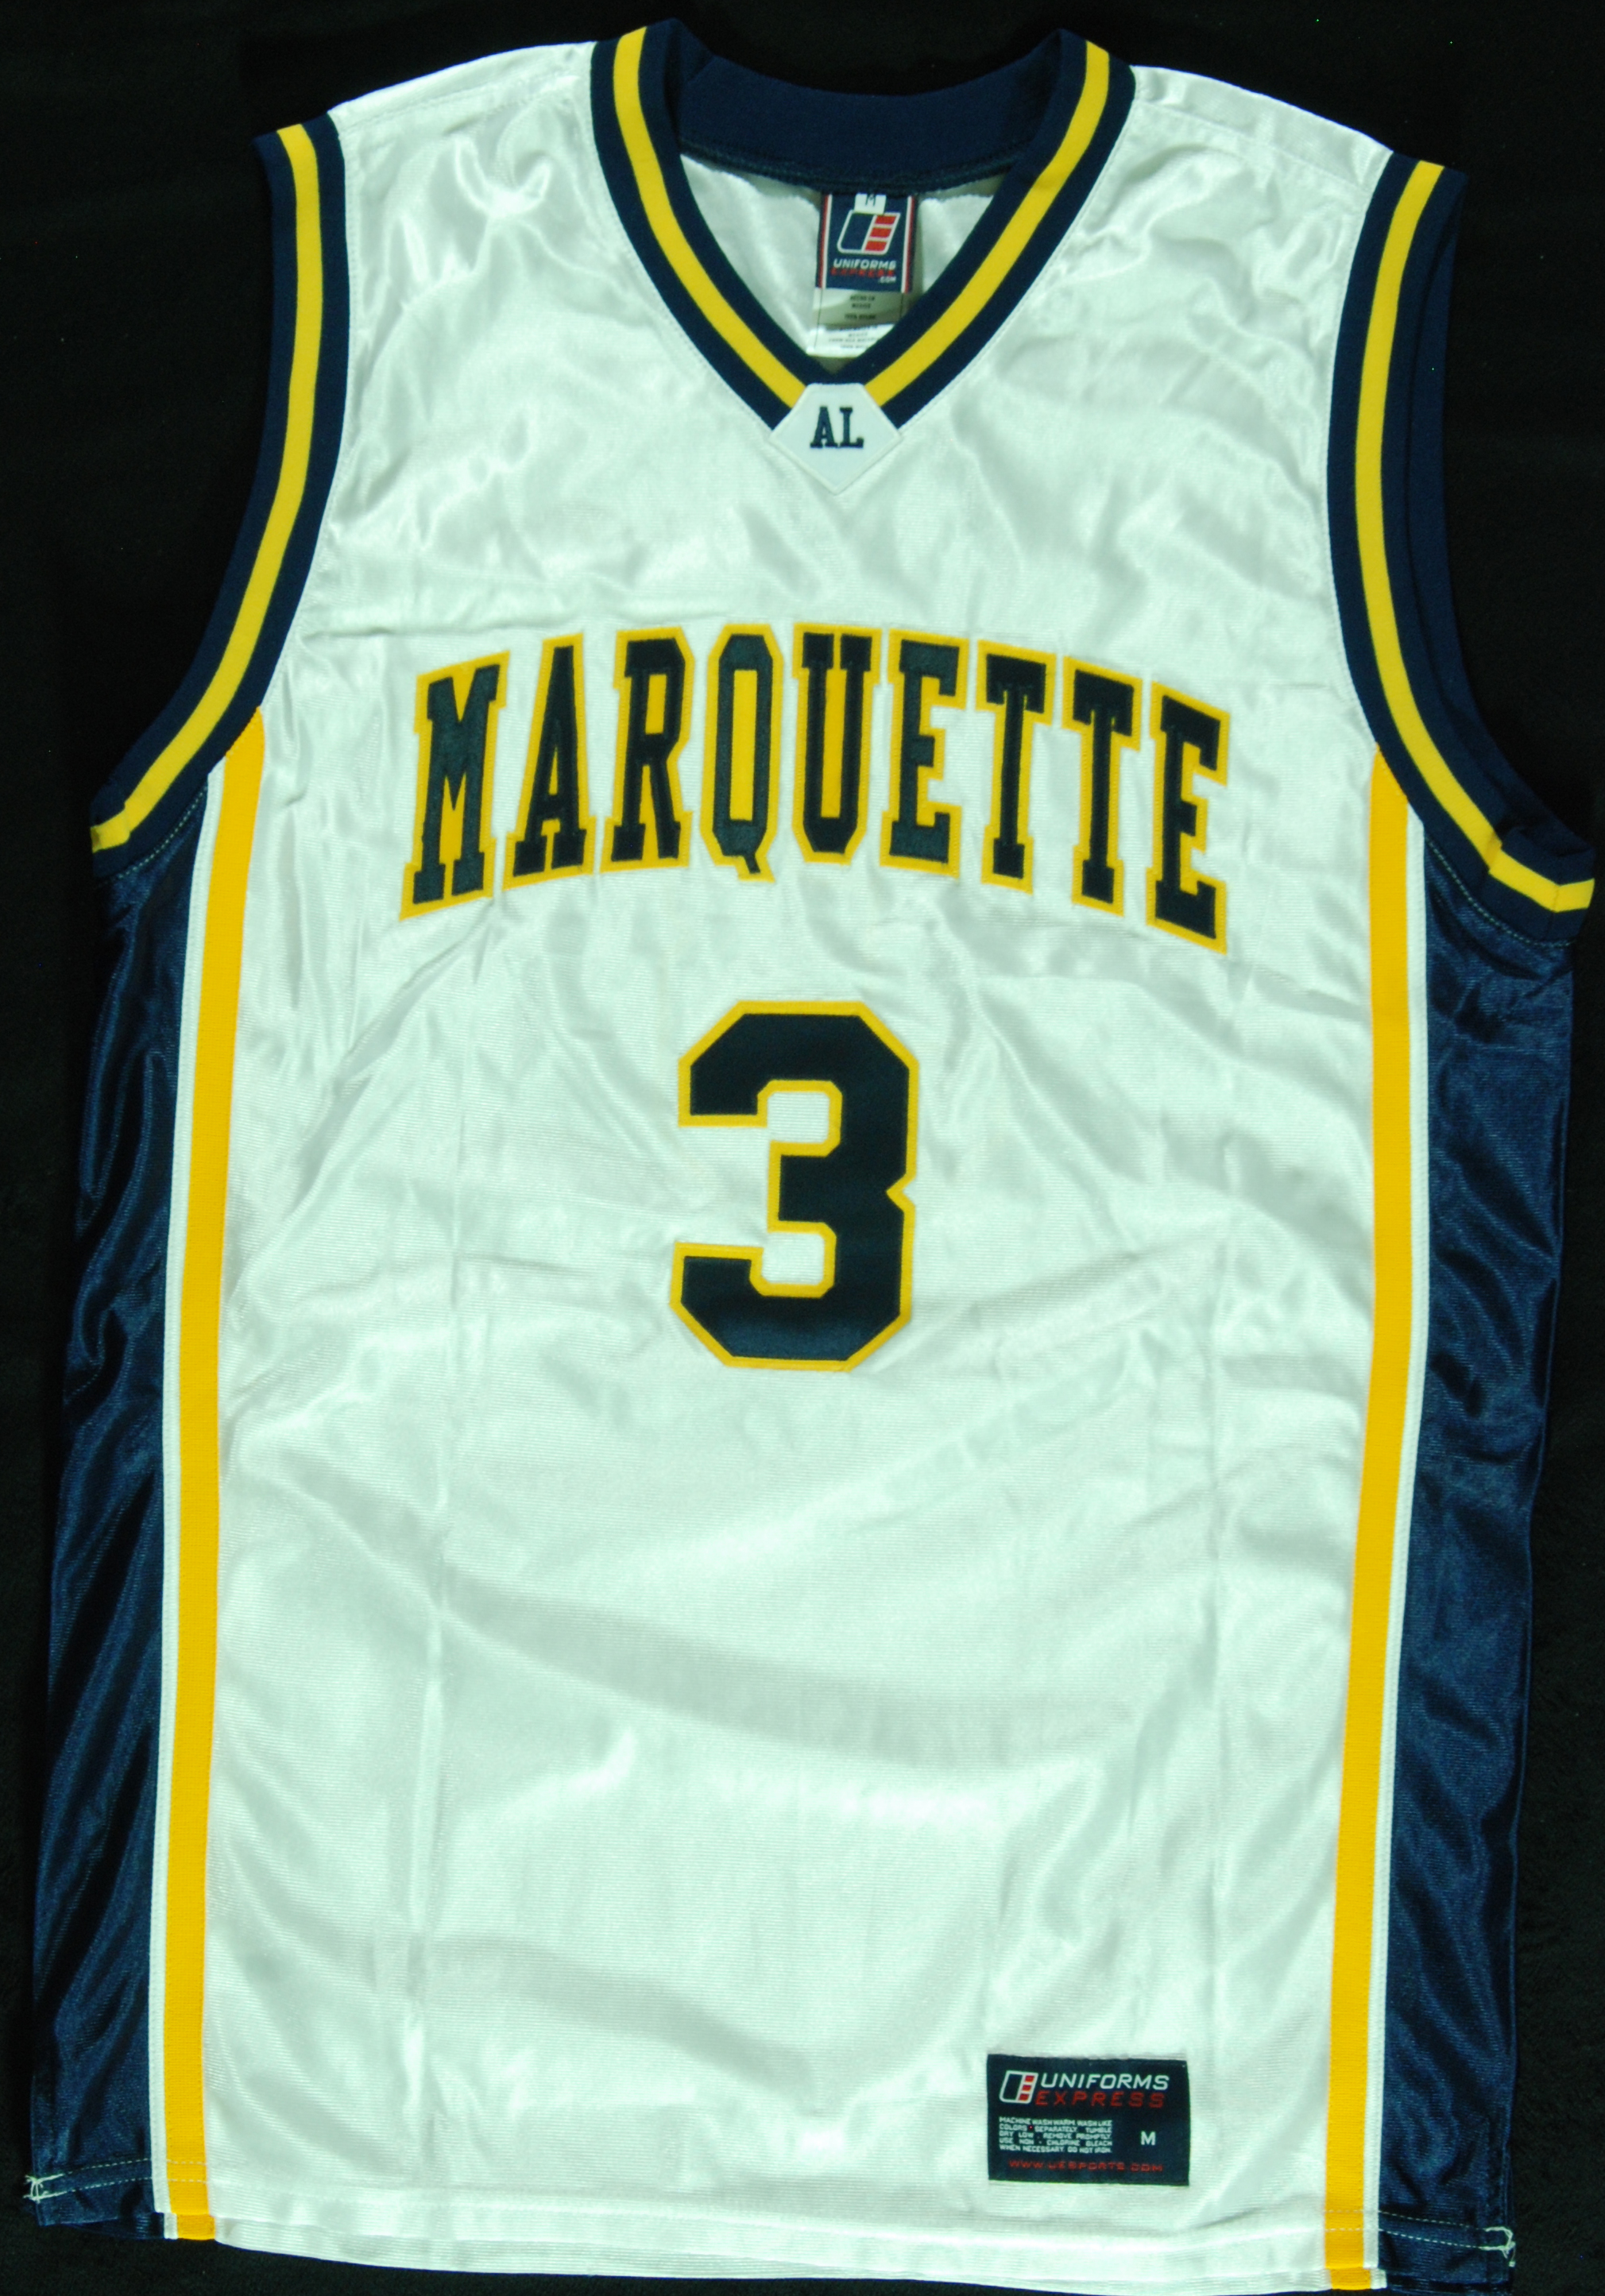 marquette wade jersey